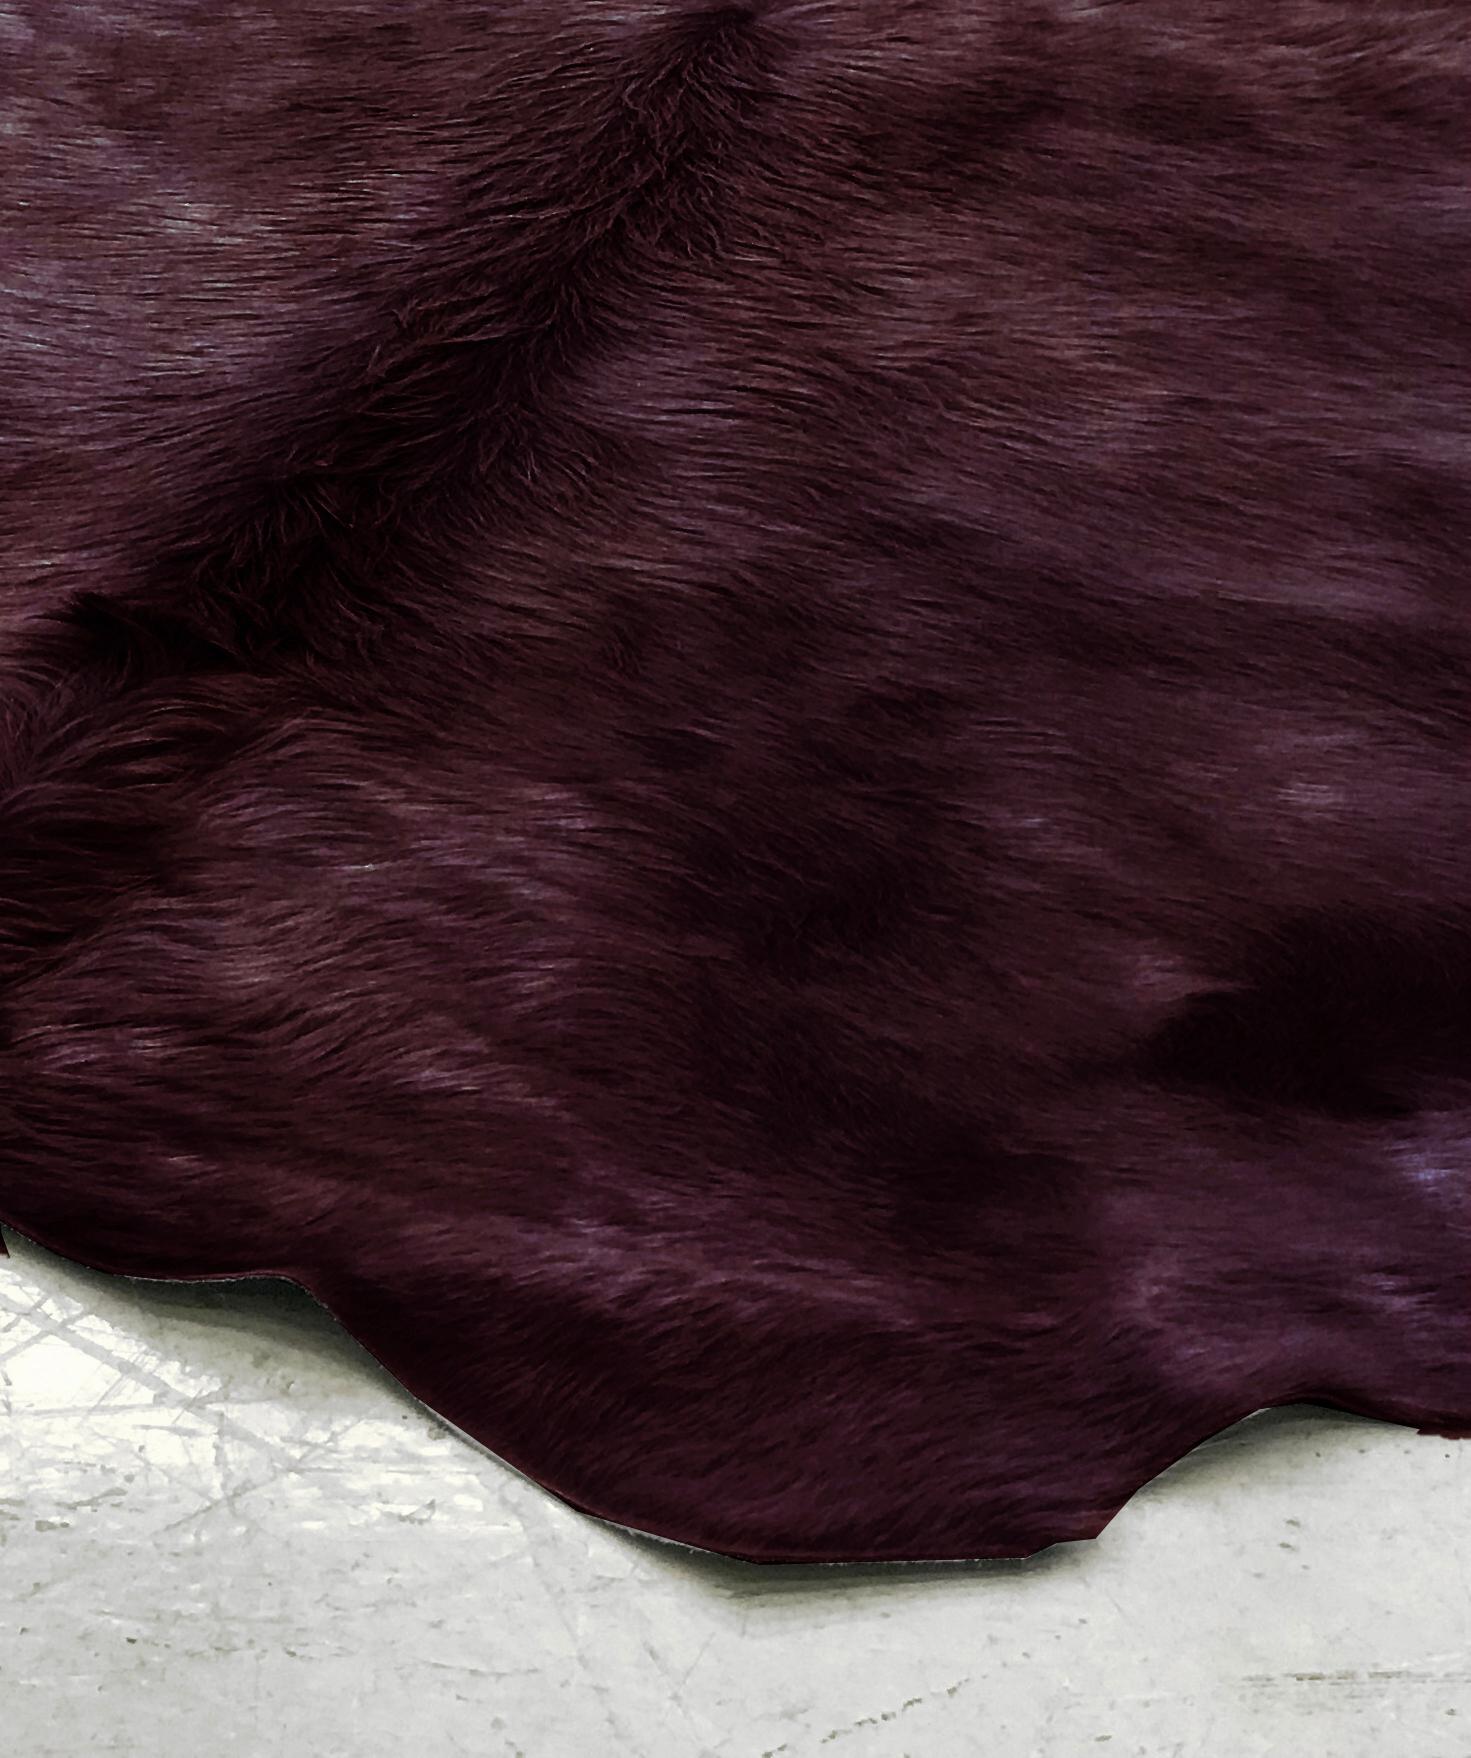 Cowhide Rug, Burgundy, Hand Dyed, Sustainably Sourced, Variety of Colors In New Condition For Sale In London, GB